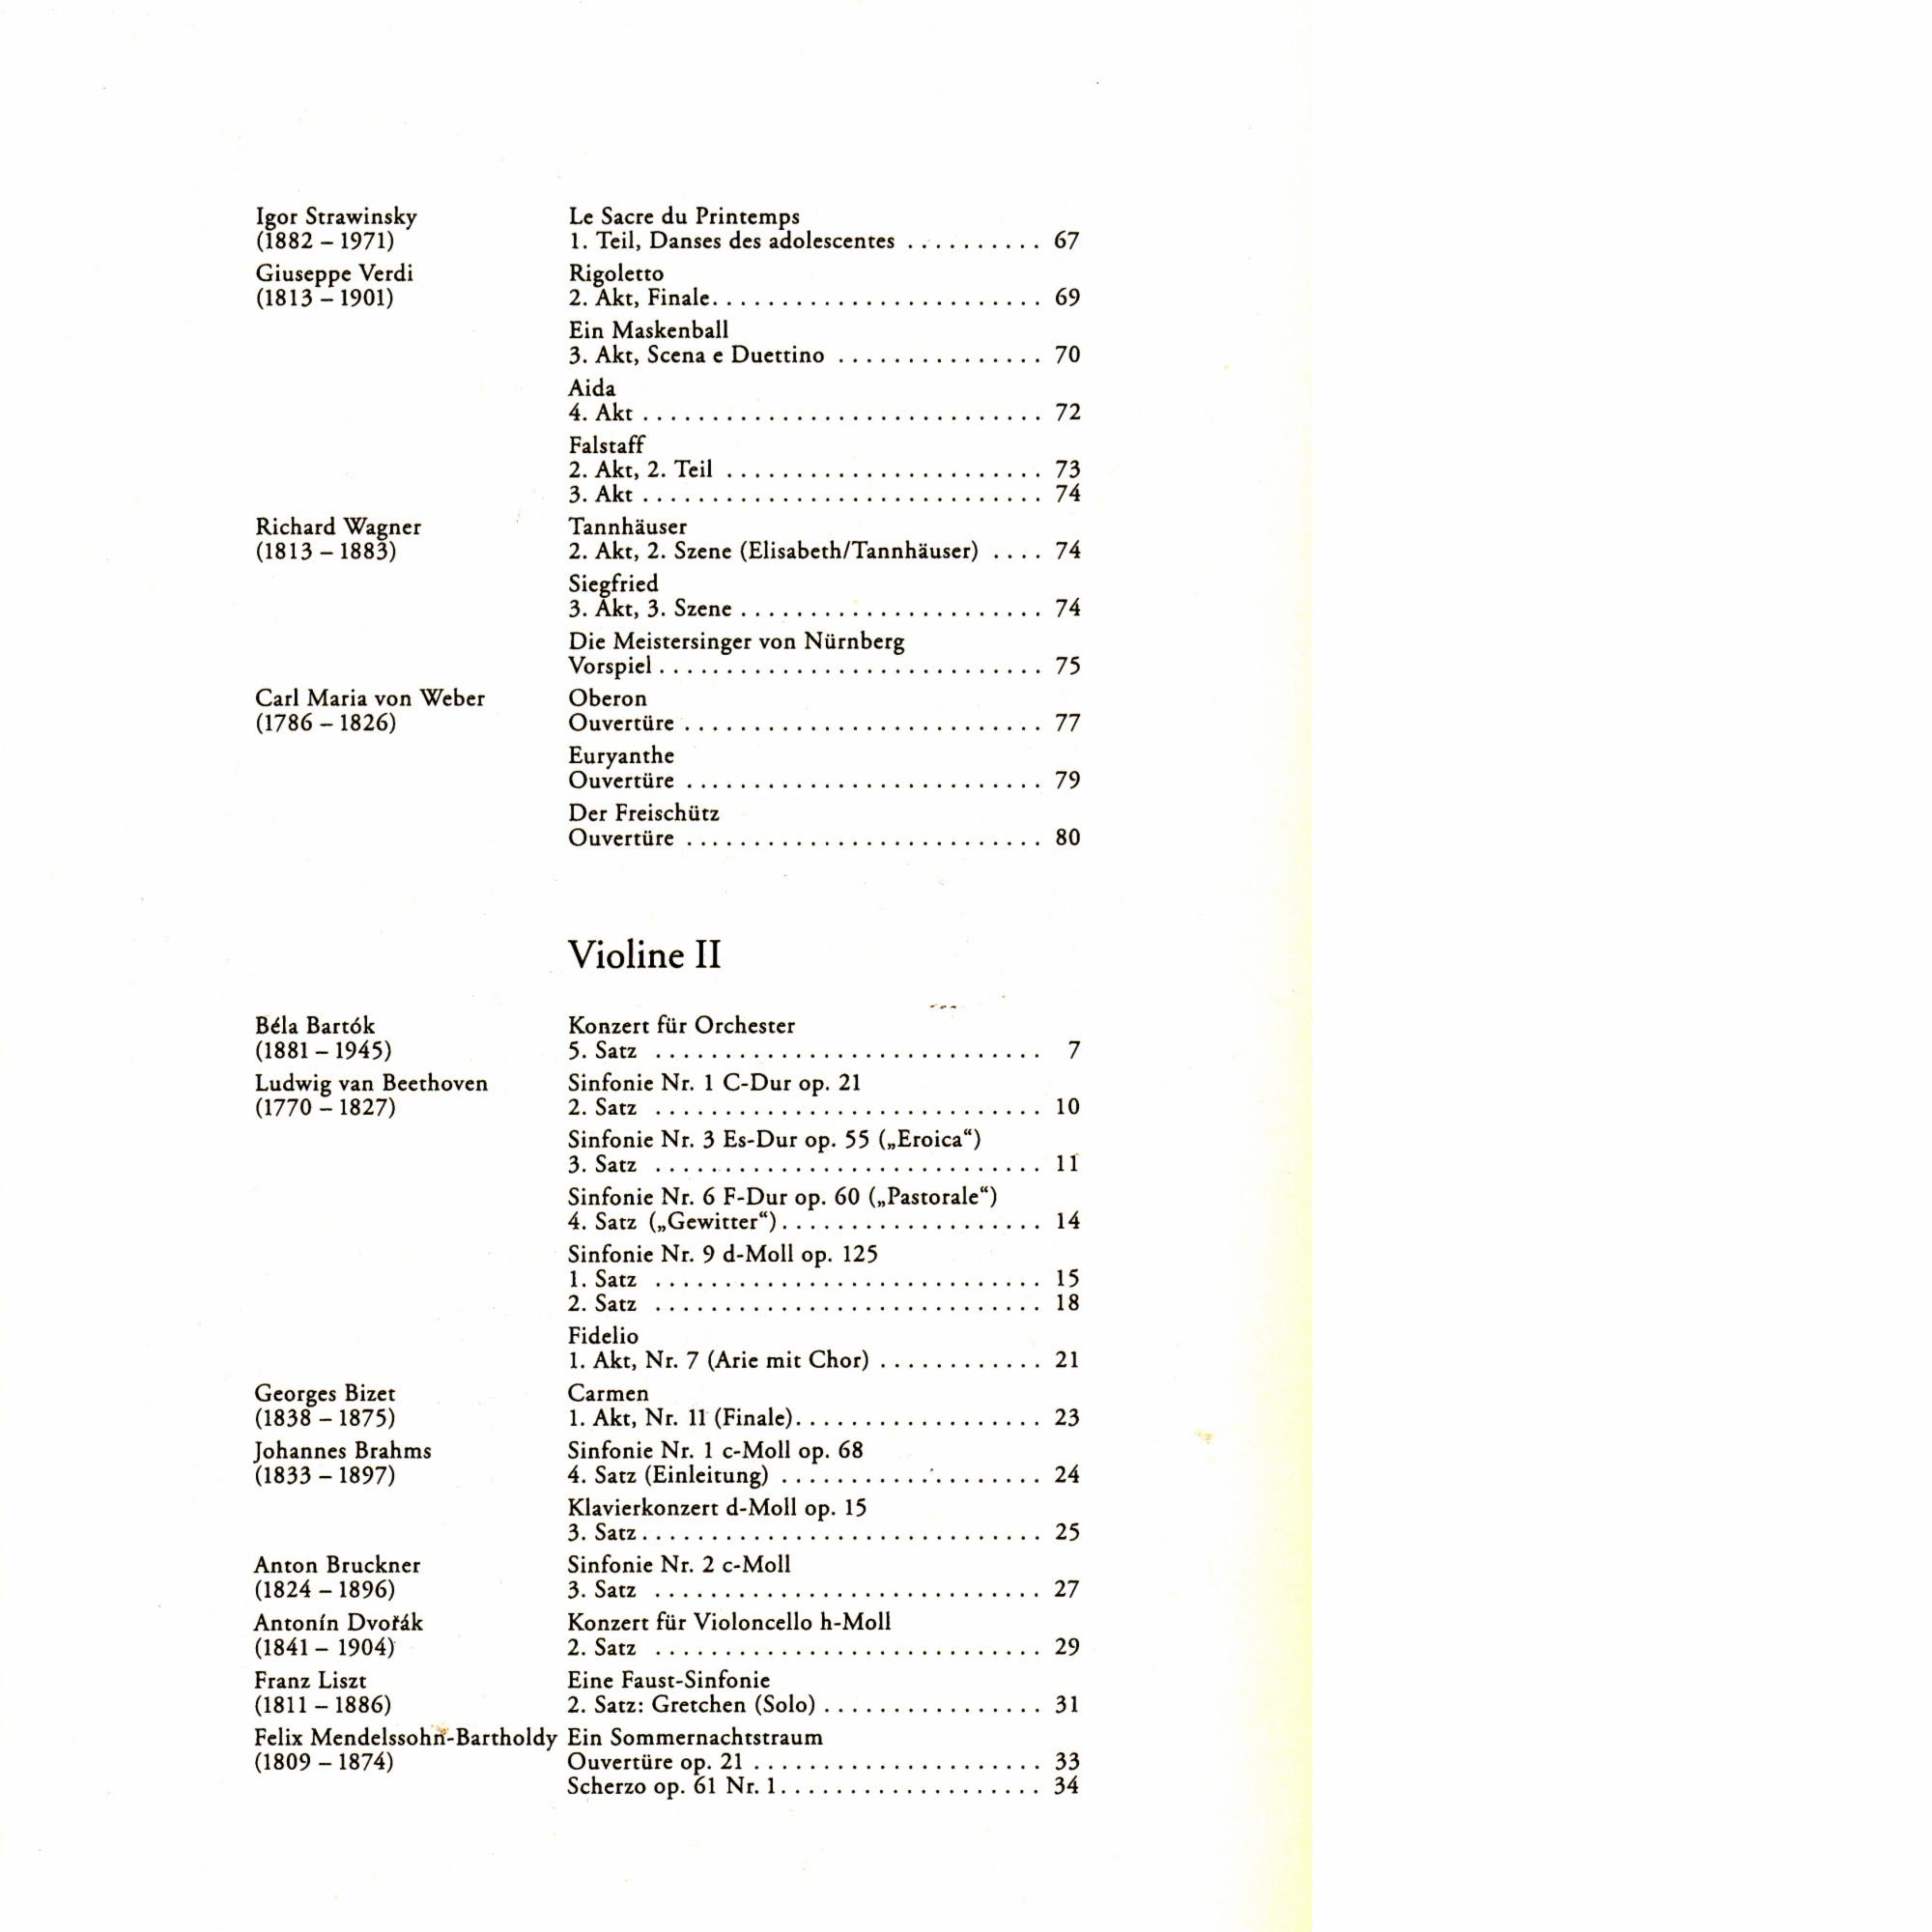 Contents - Page 2